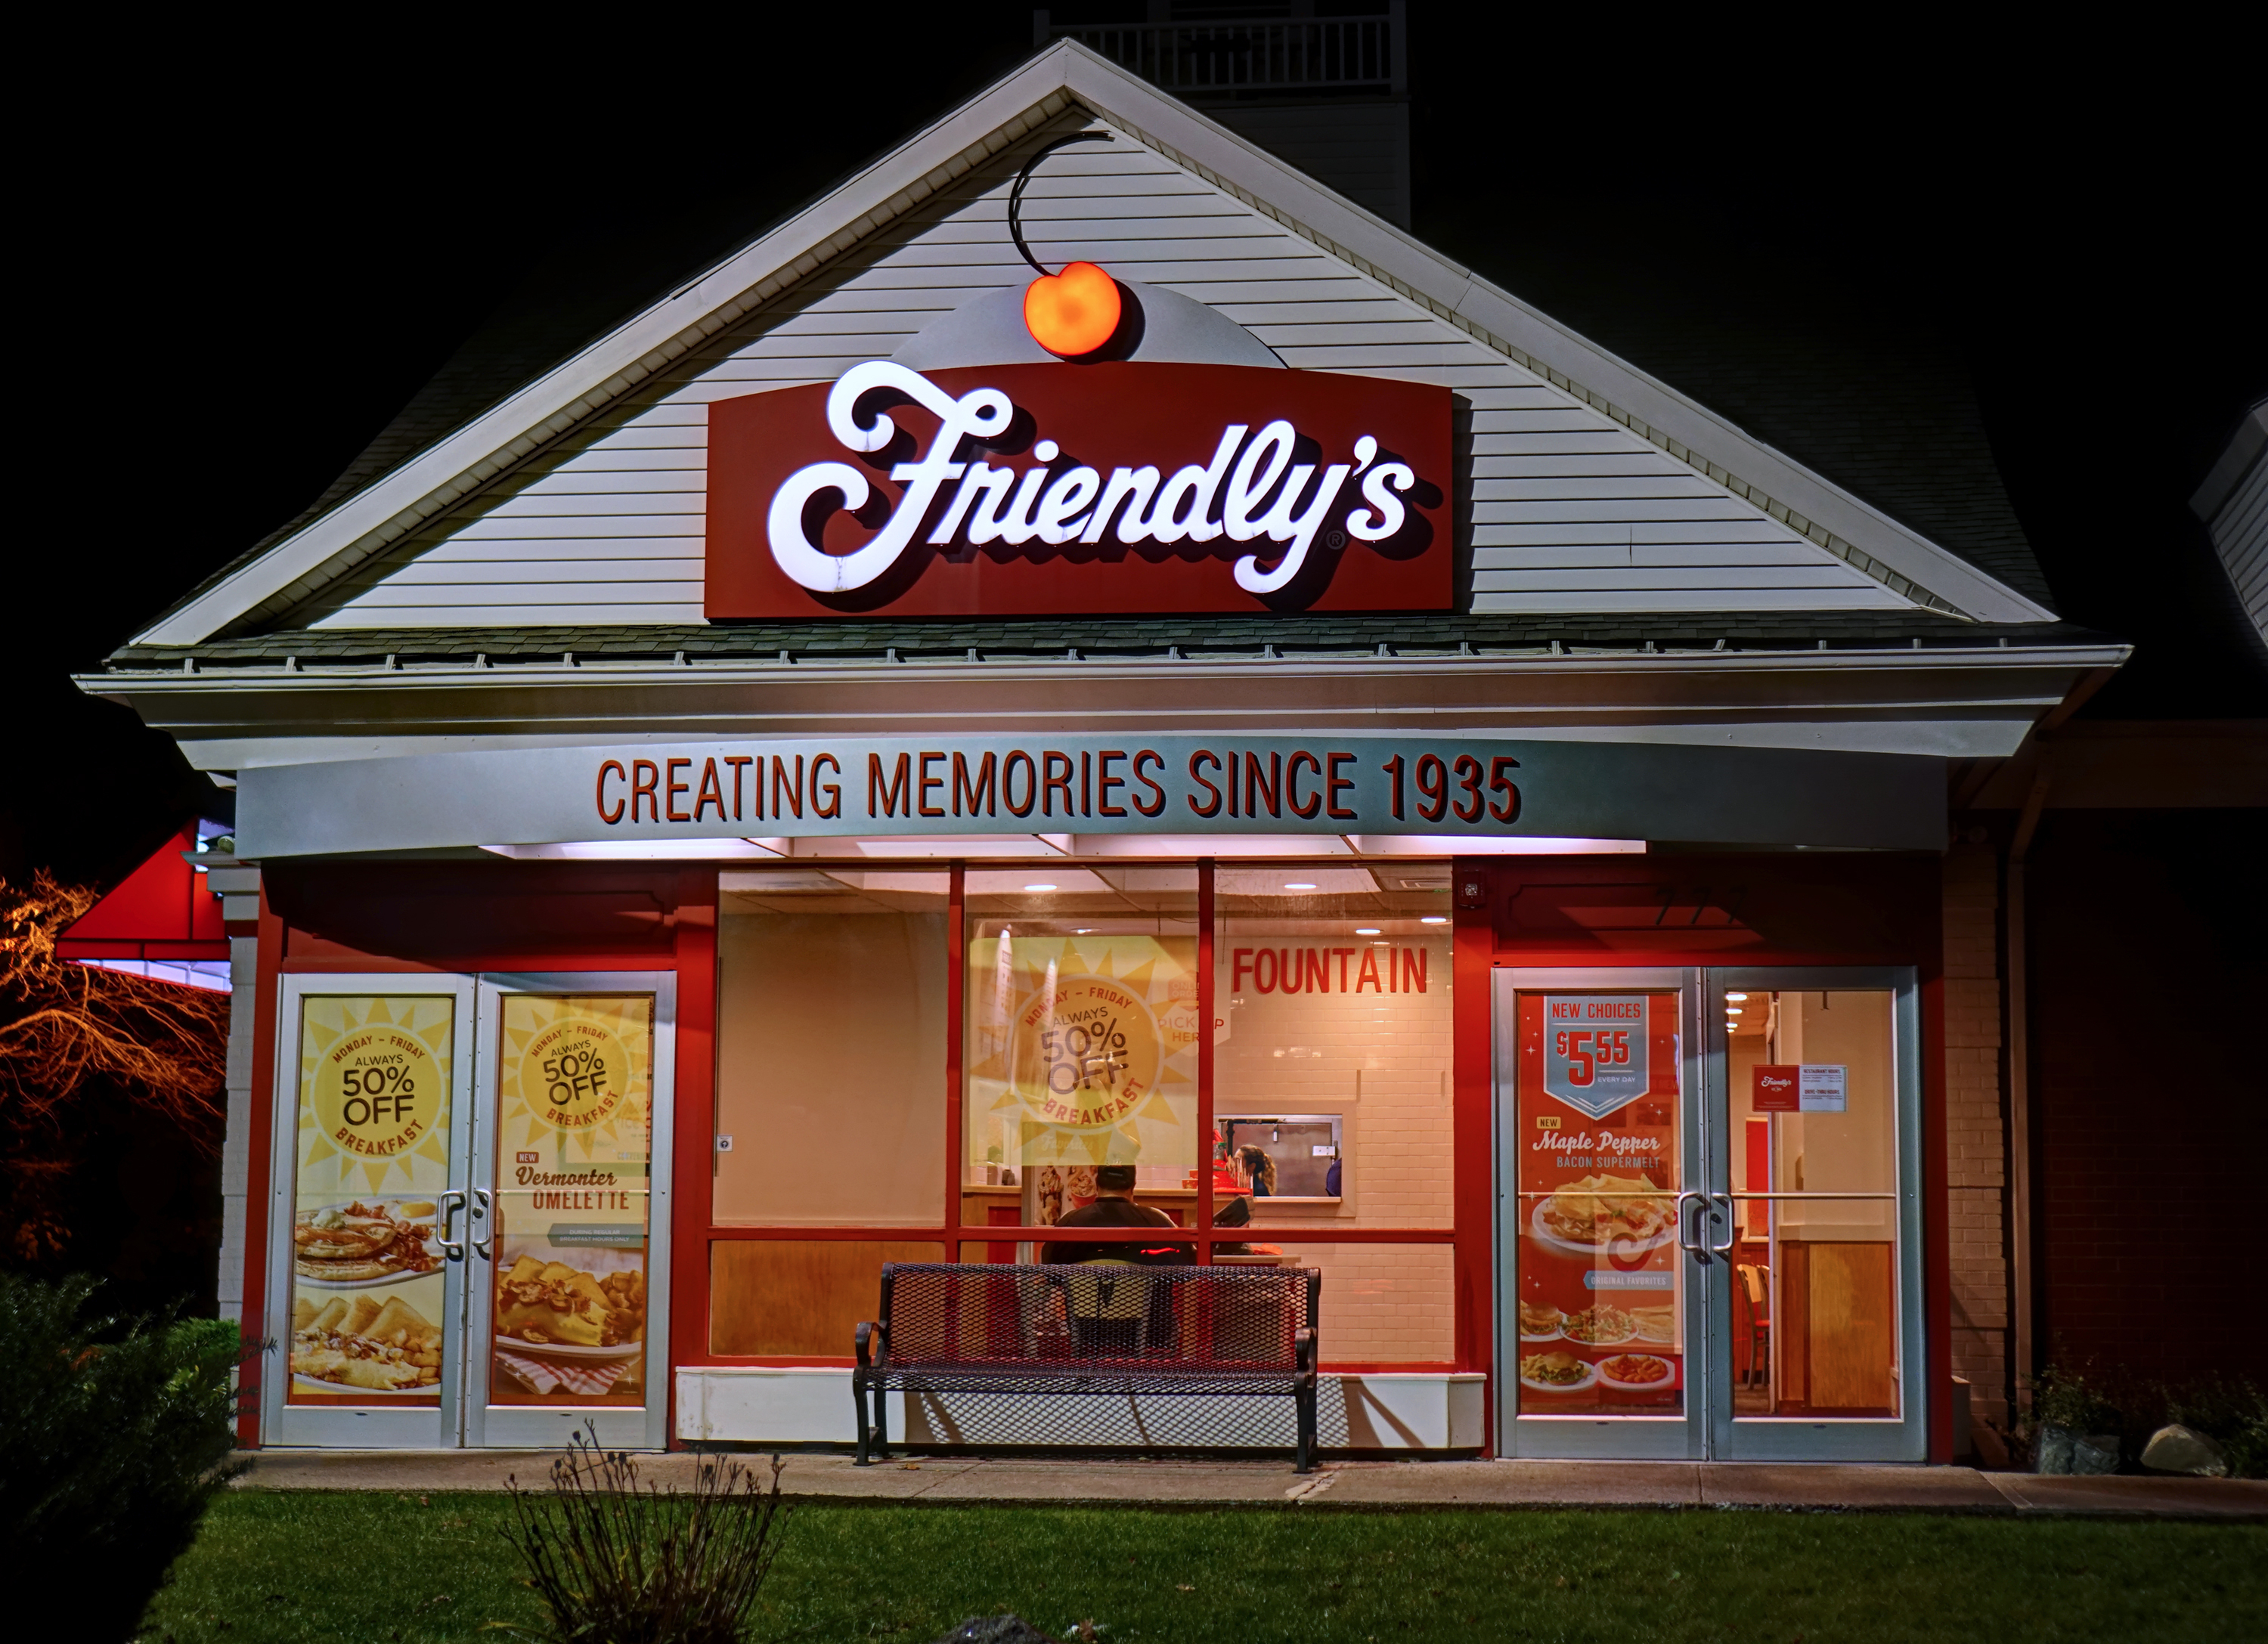 The exterior of a Friendly’s restaurant, lit up inside during nighttime.